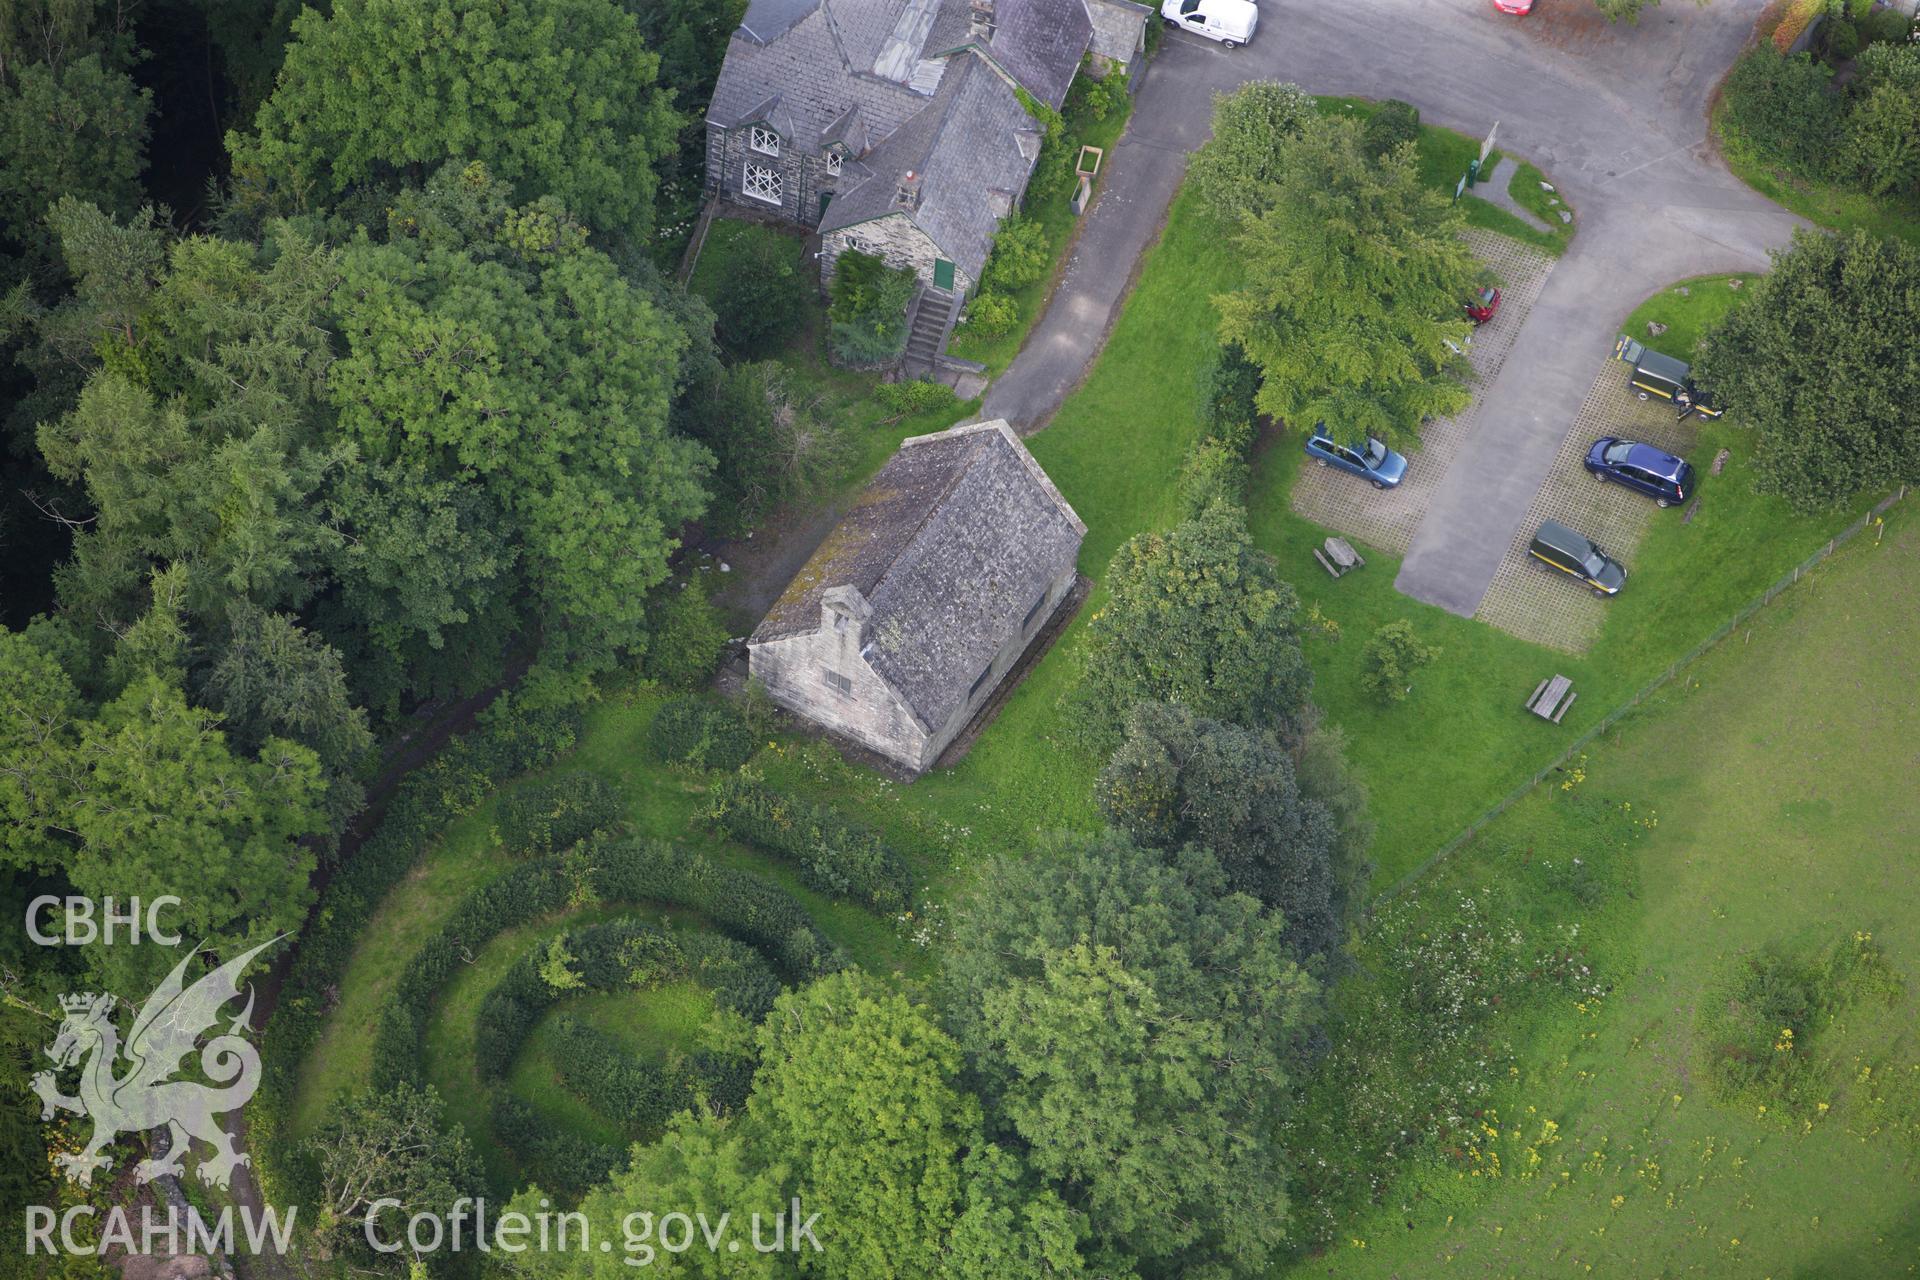 RCAHMW colour oblique aerial photograph of Chapel of Holy Trinity, Llanrychwyn. Taken on 06 August 2009 by Toby Driver